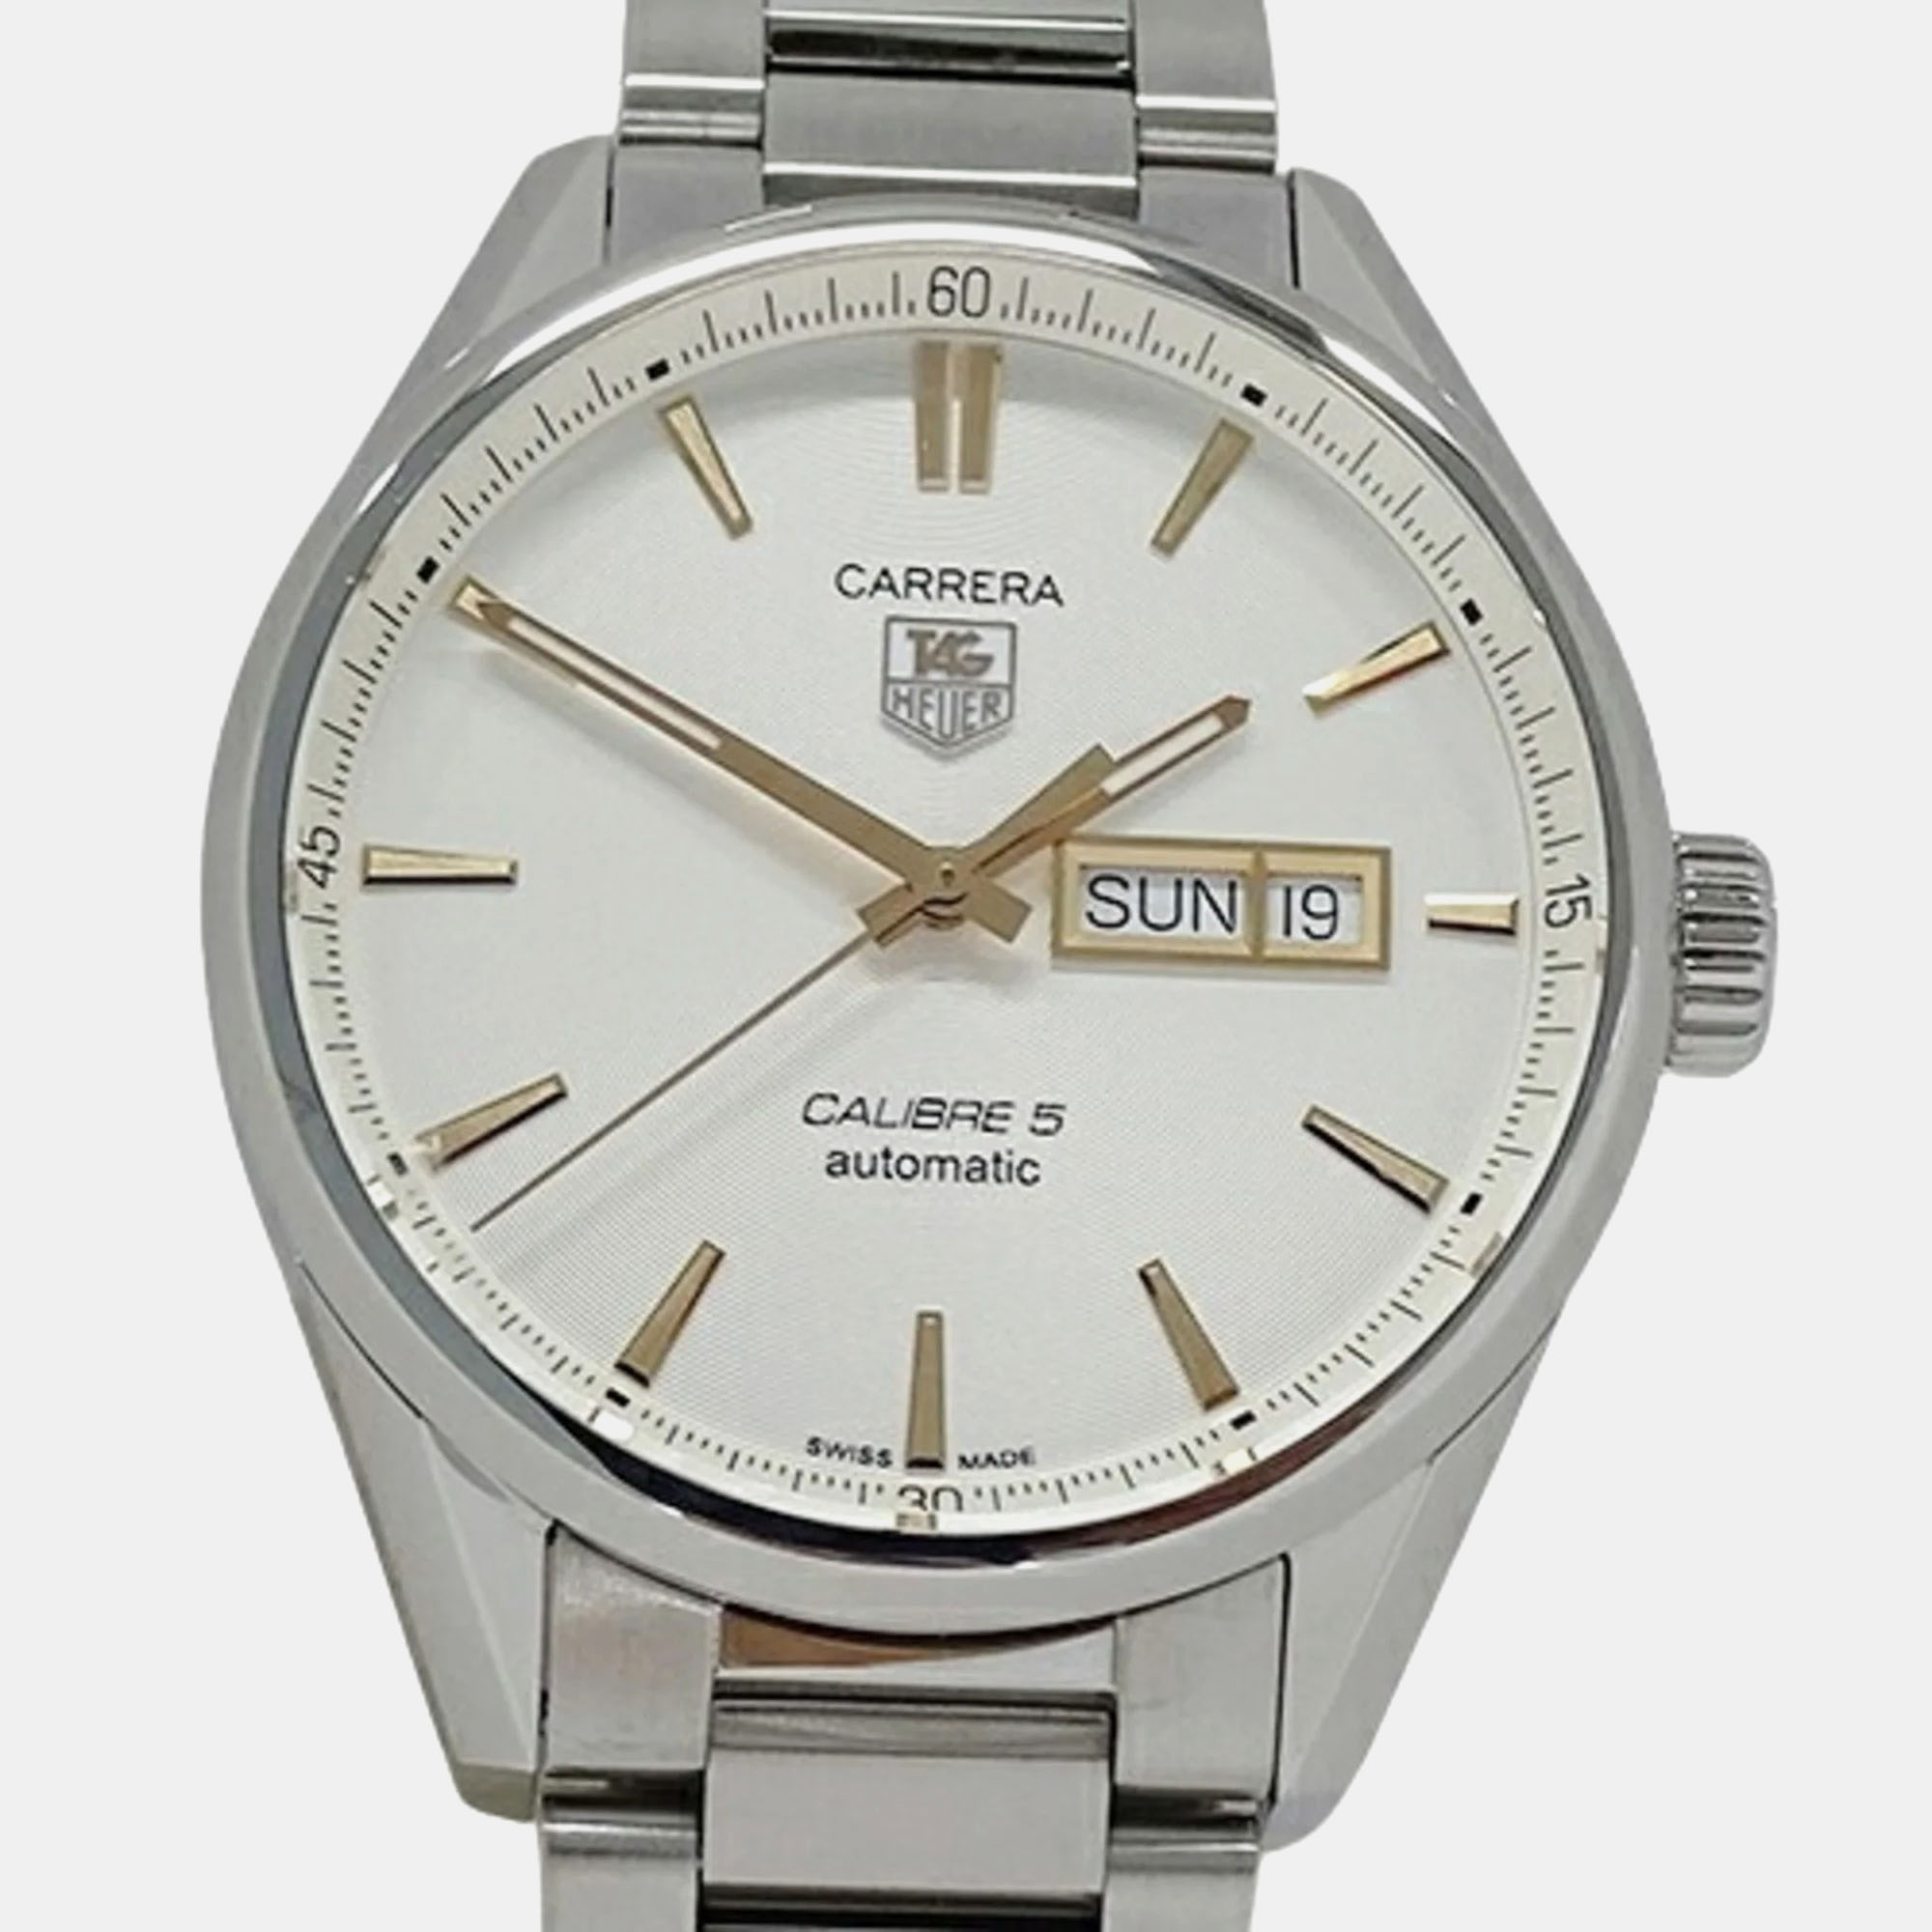 Tag heuer white stainless steel carrera war201d automatic men's wristwatch 41 mm